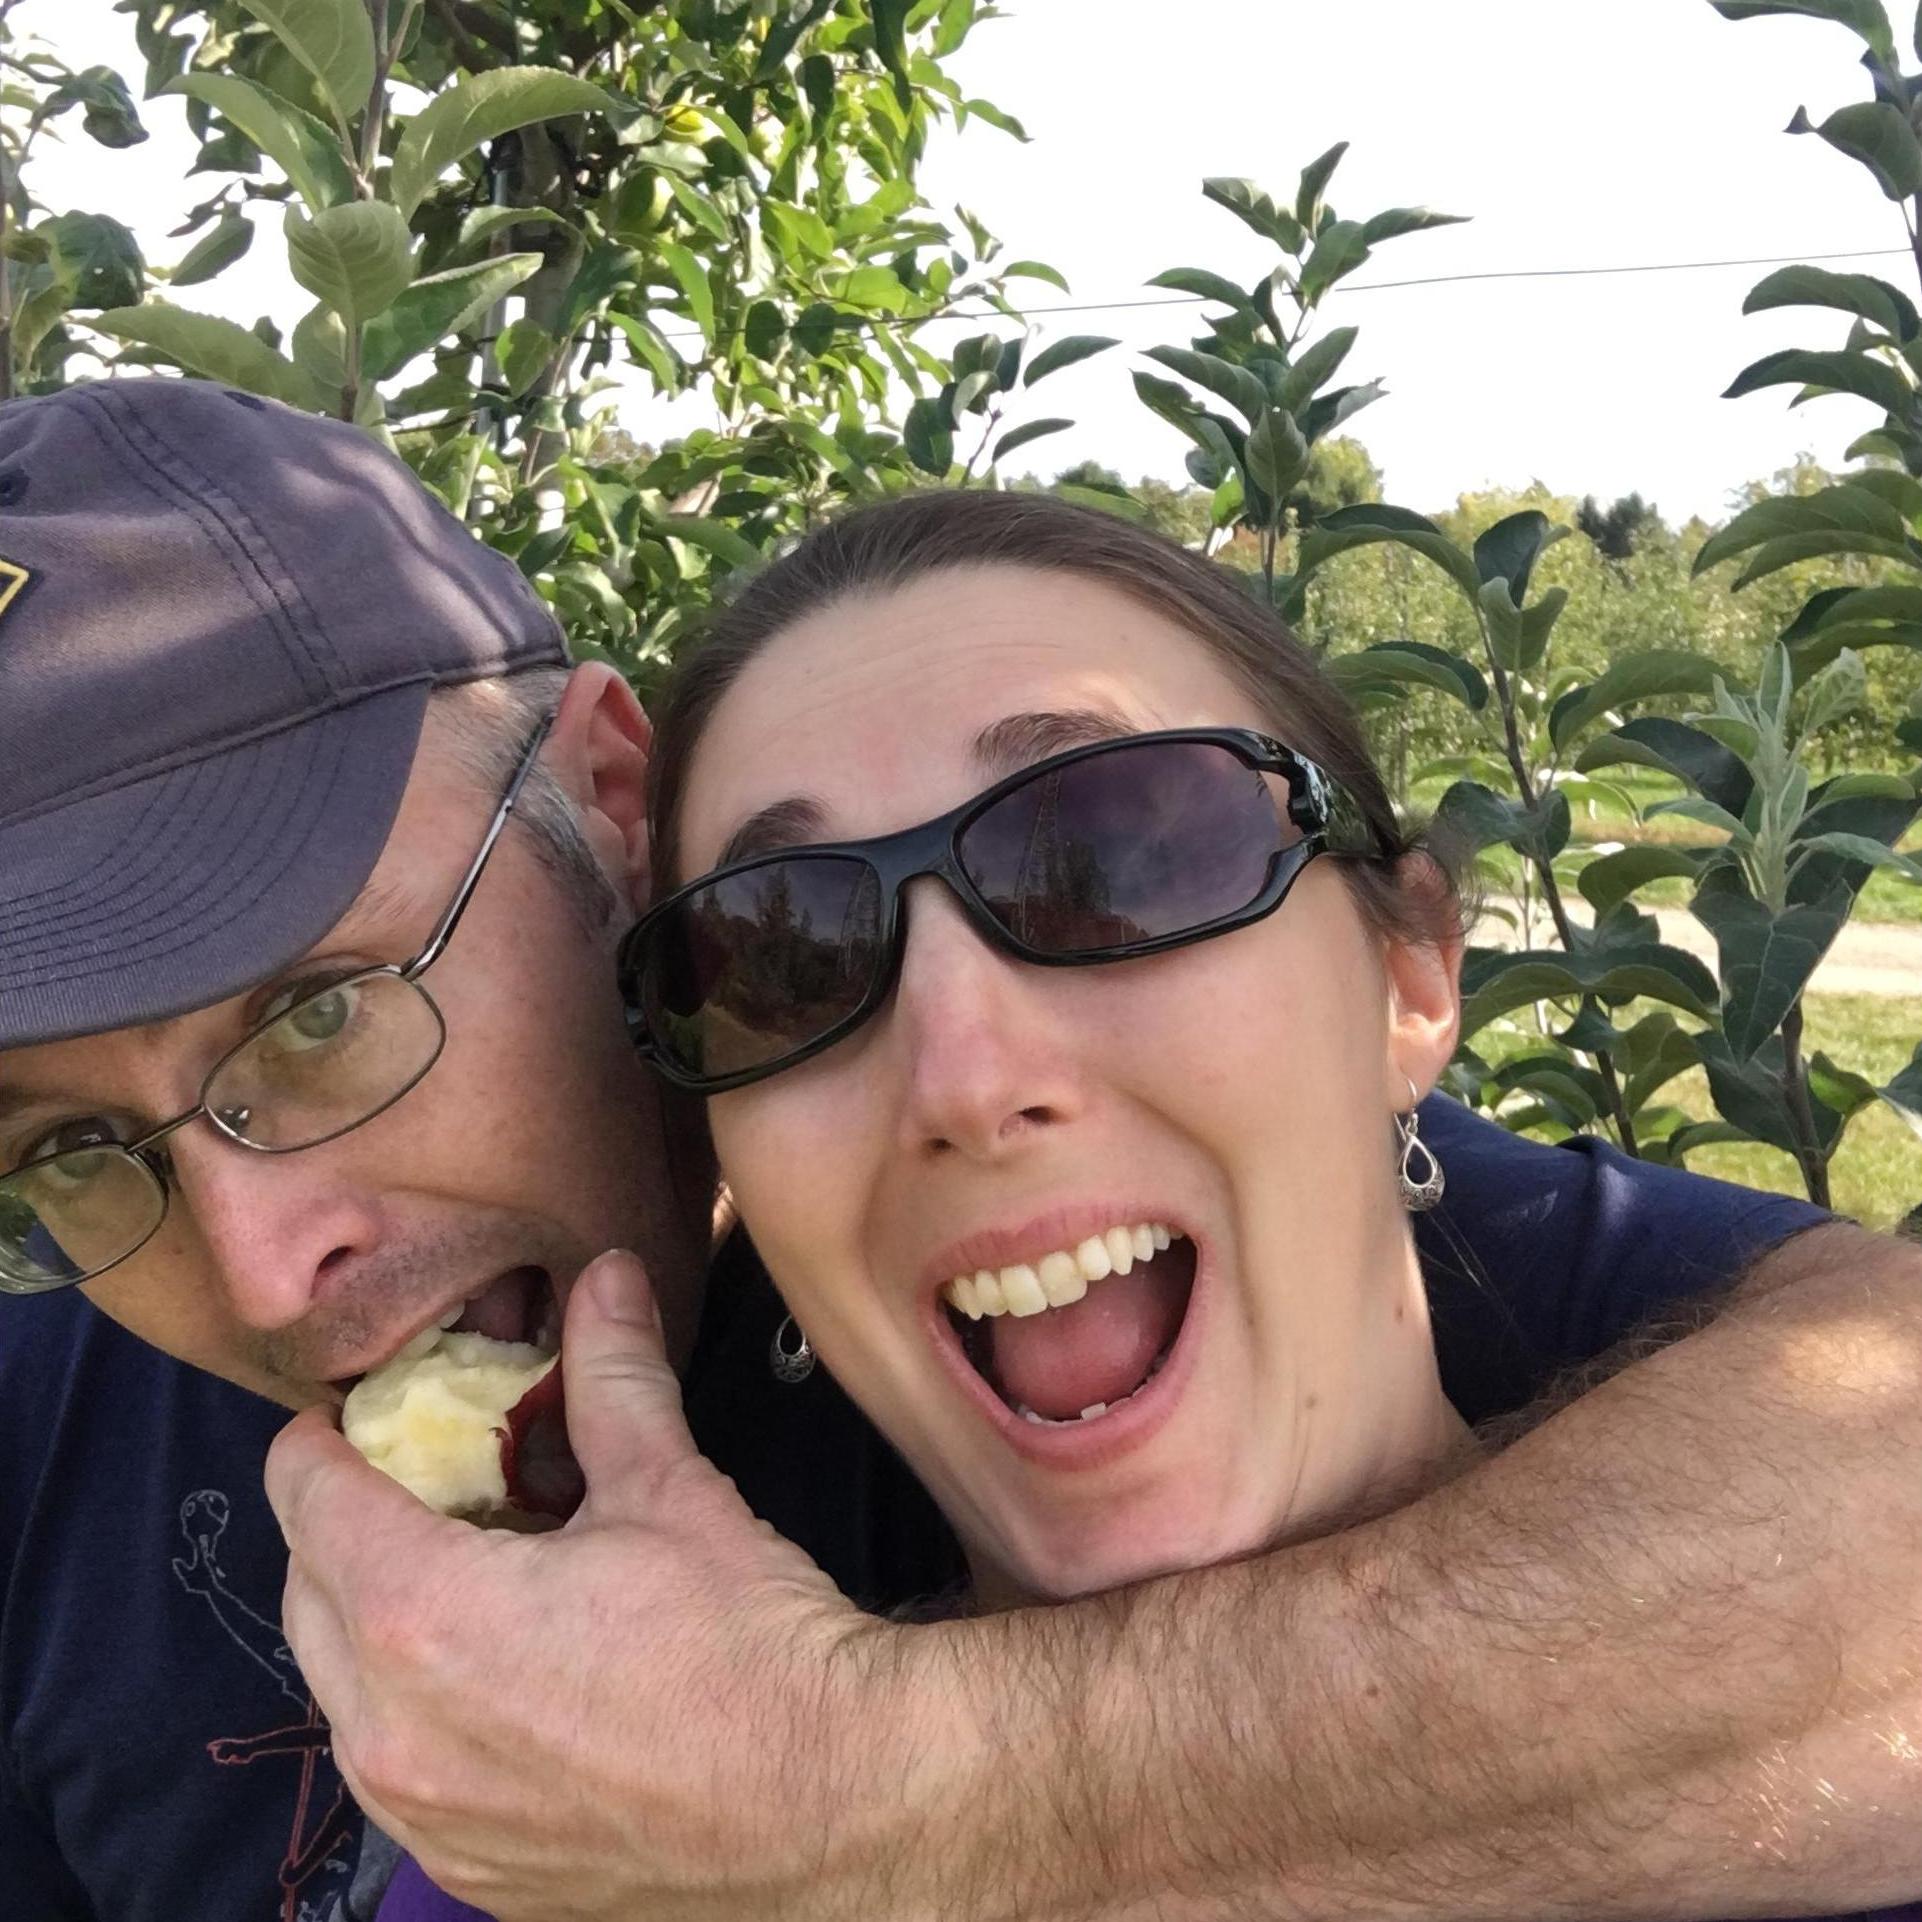 Never a dull moment!  Apple picking in the Fall.